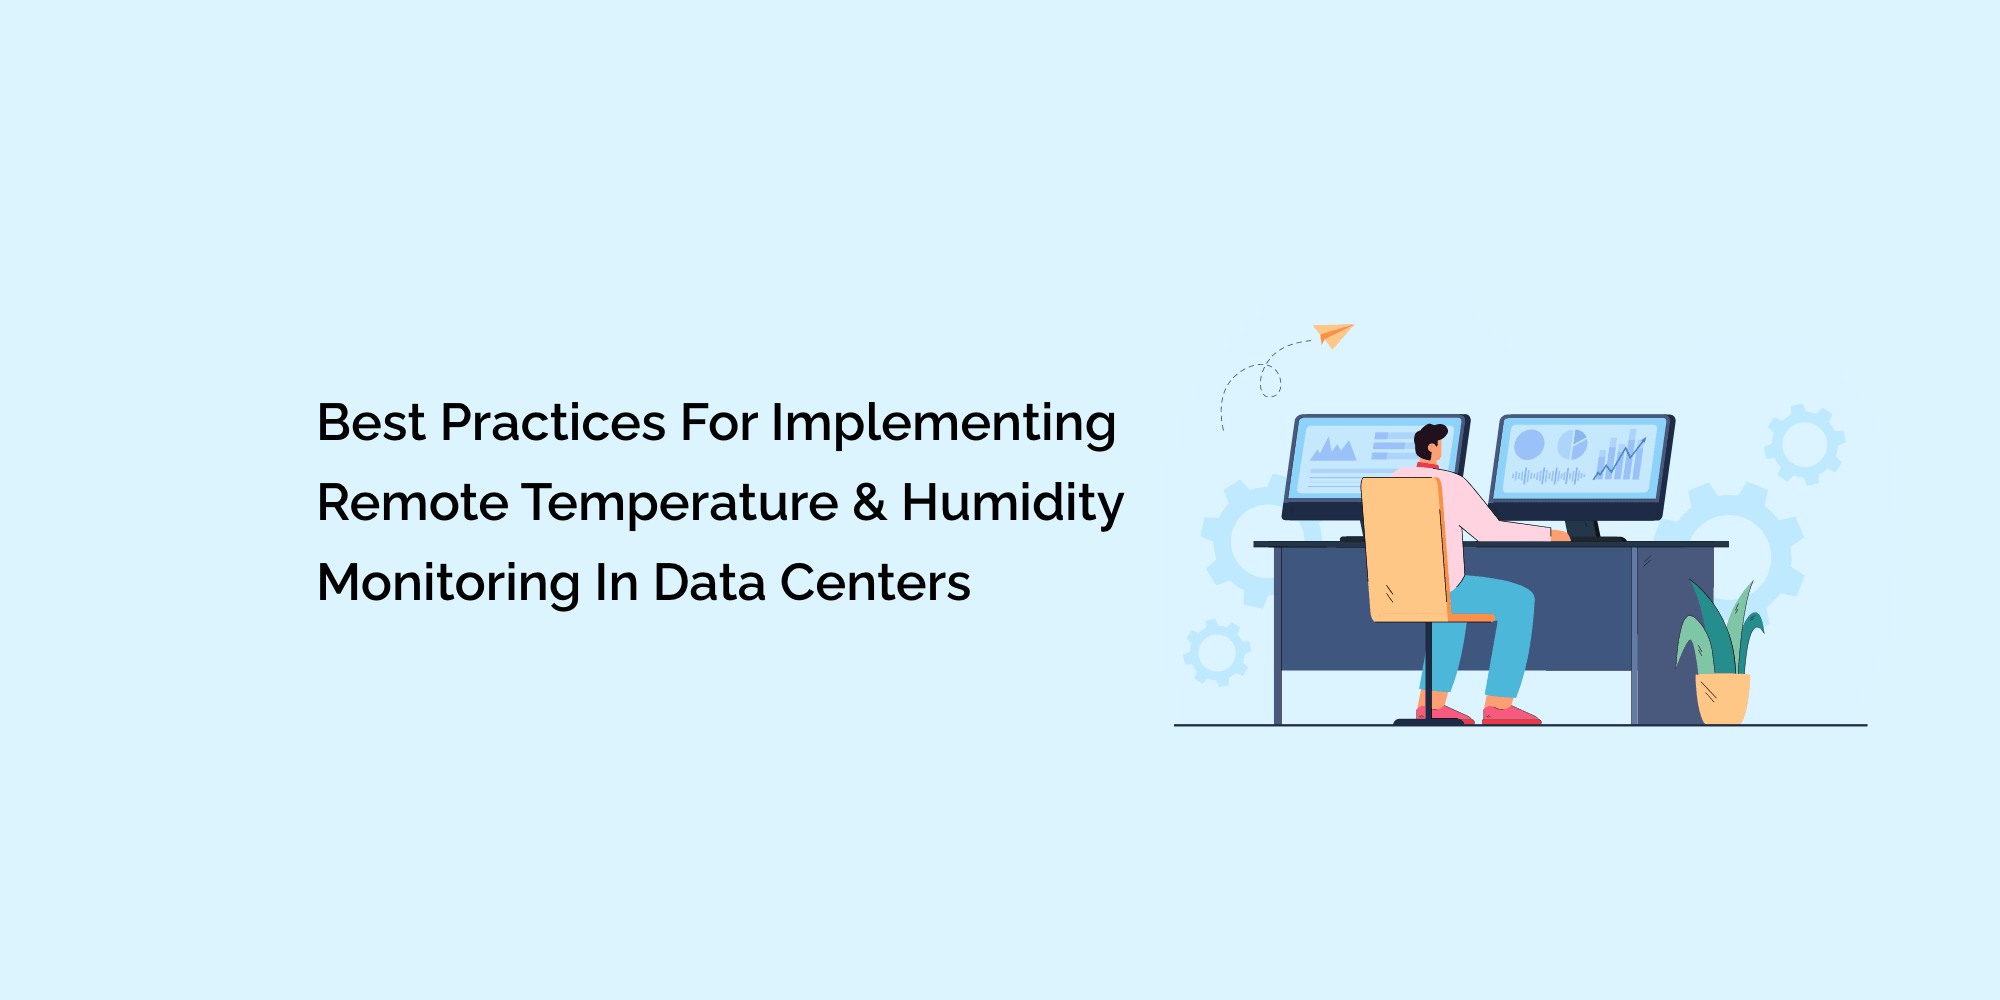 Best Practices for Implementing Remote Temperature and Humidity Monitoring in Data Centers